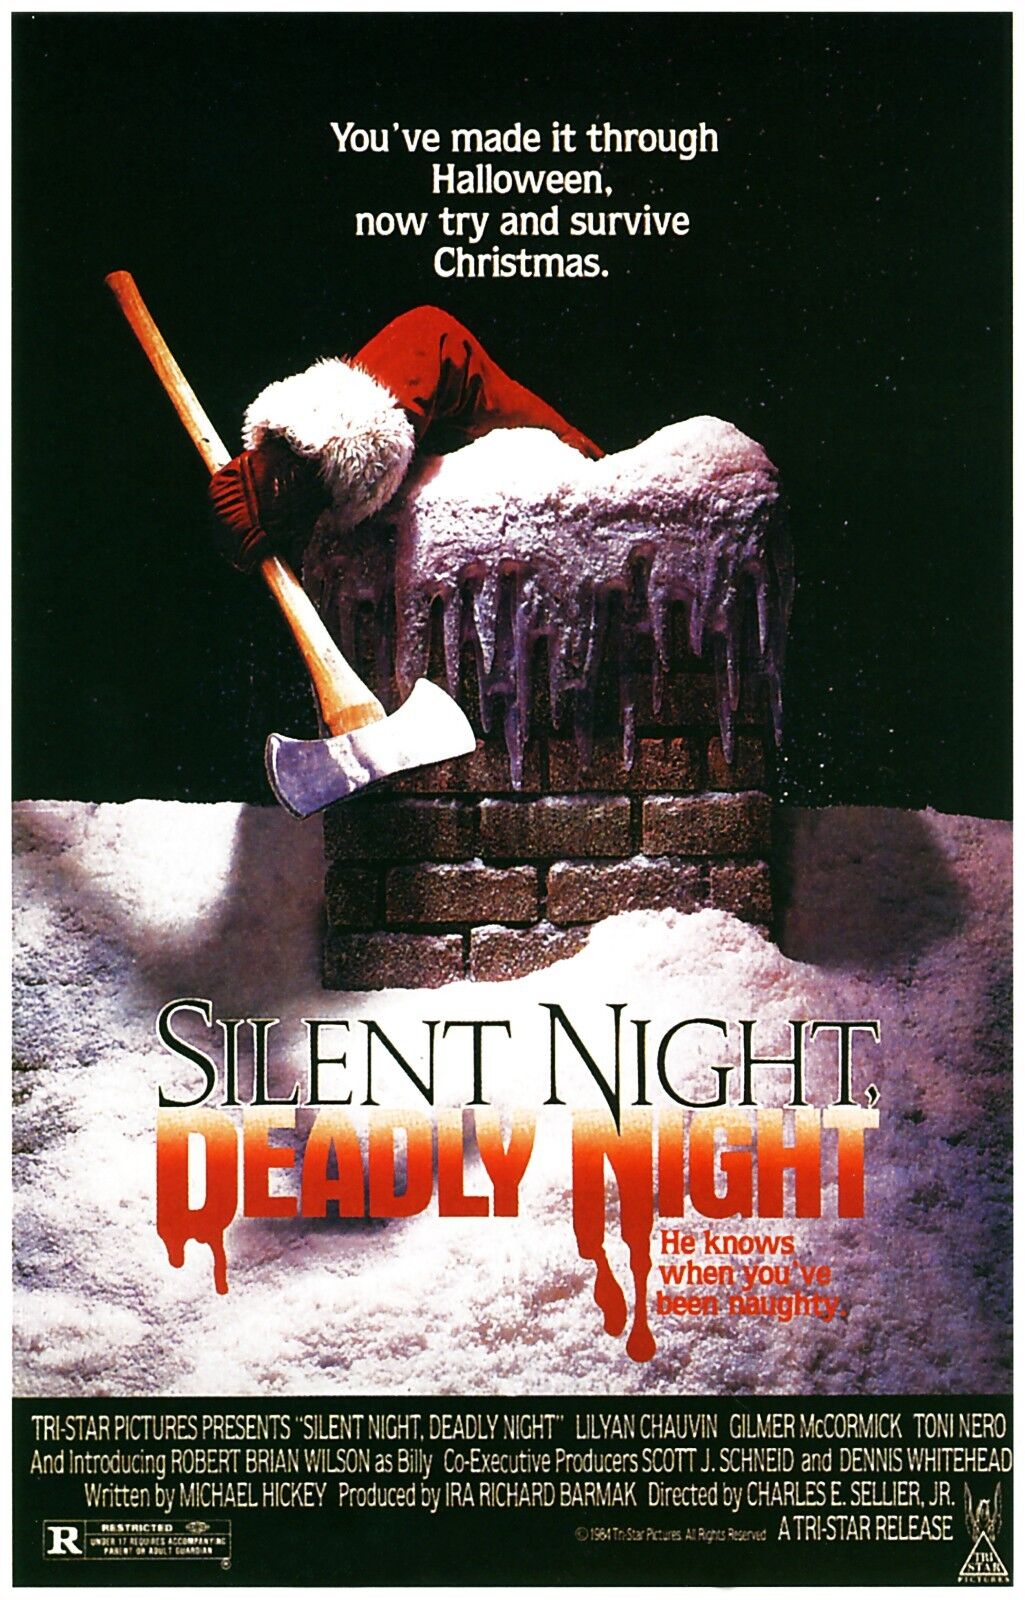 Film poster for SILENT NIGHT, DEADLY NIGHT (1984)